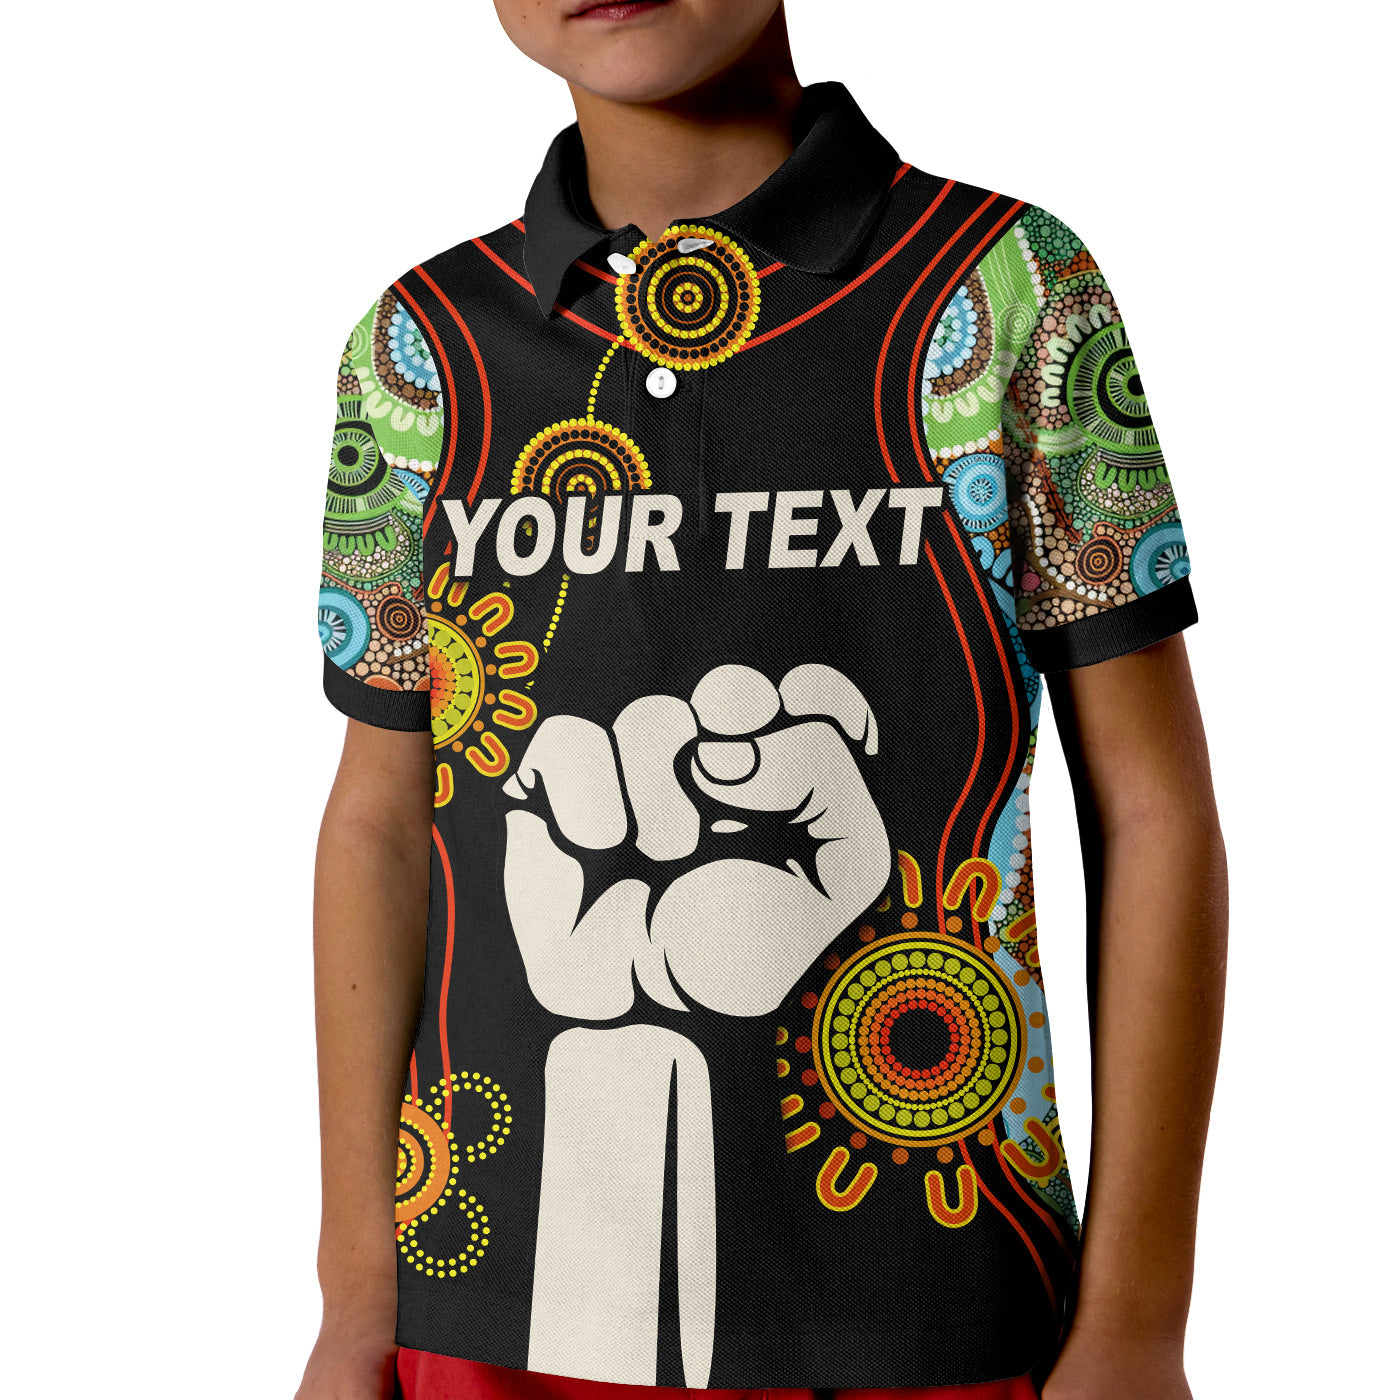 custom-personalised-naidoc-2022-polo-shirt-proud-history-of-getting-up-standing-up-and-showing-up